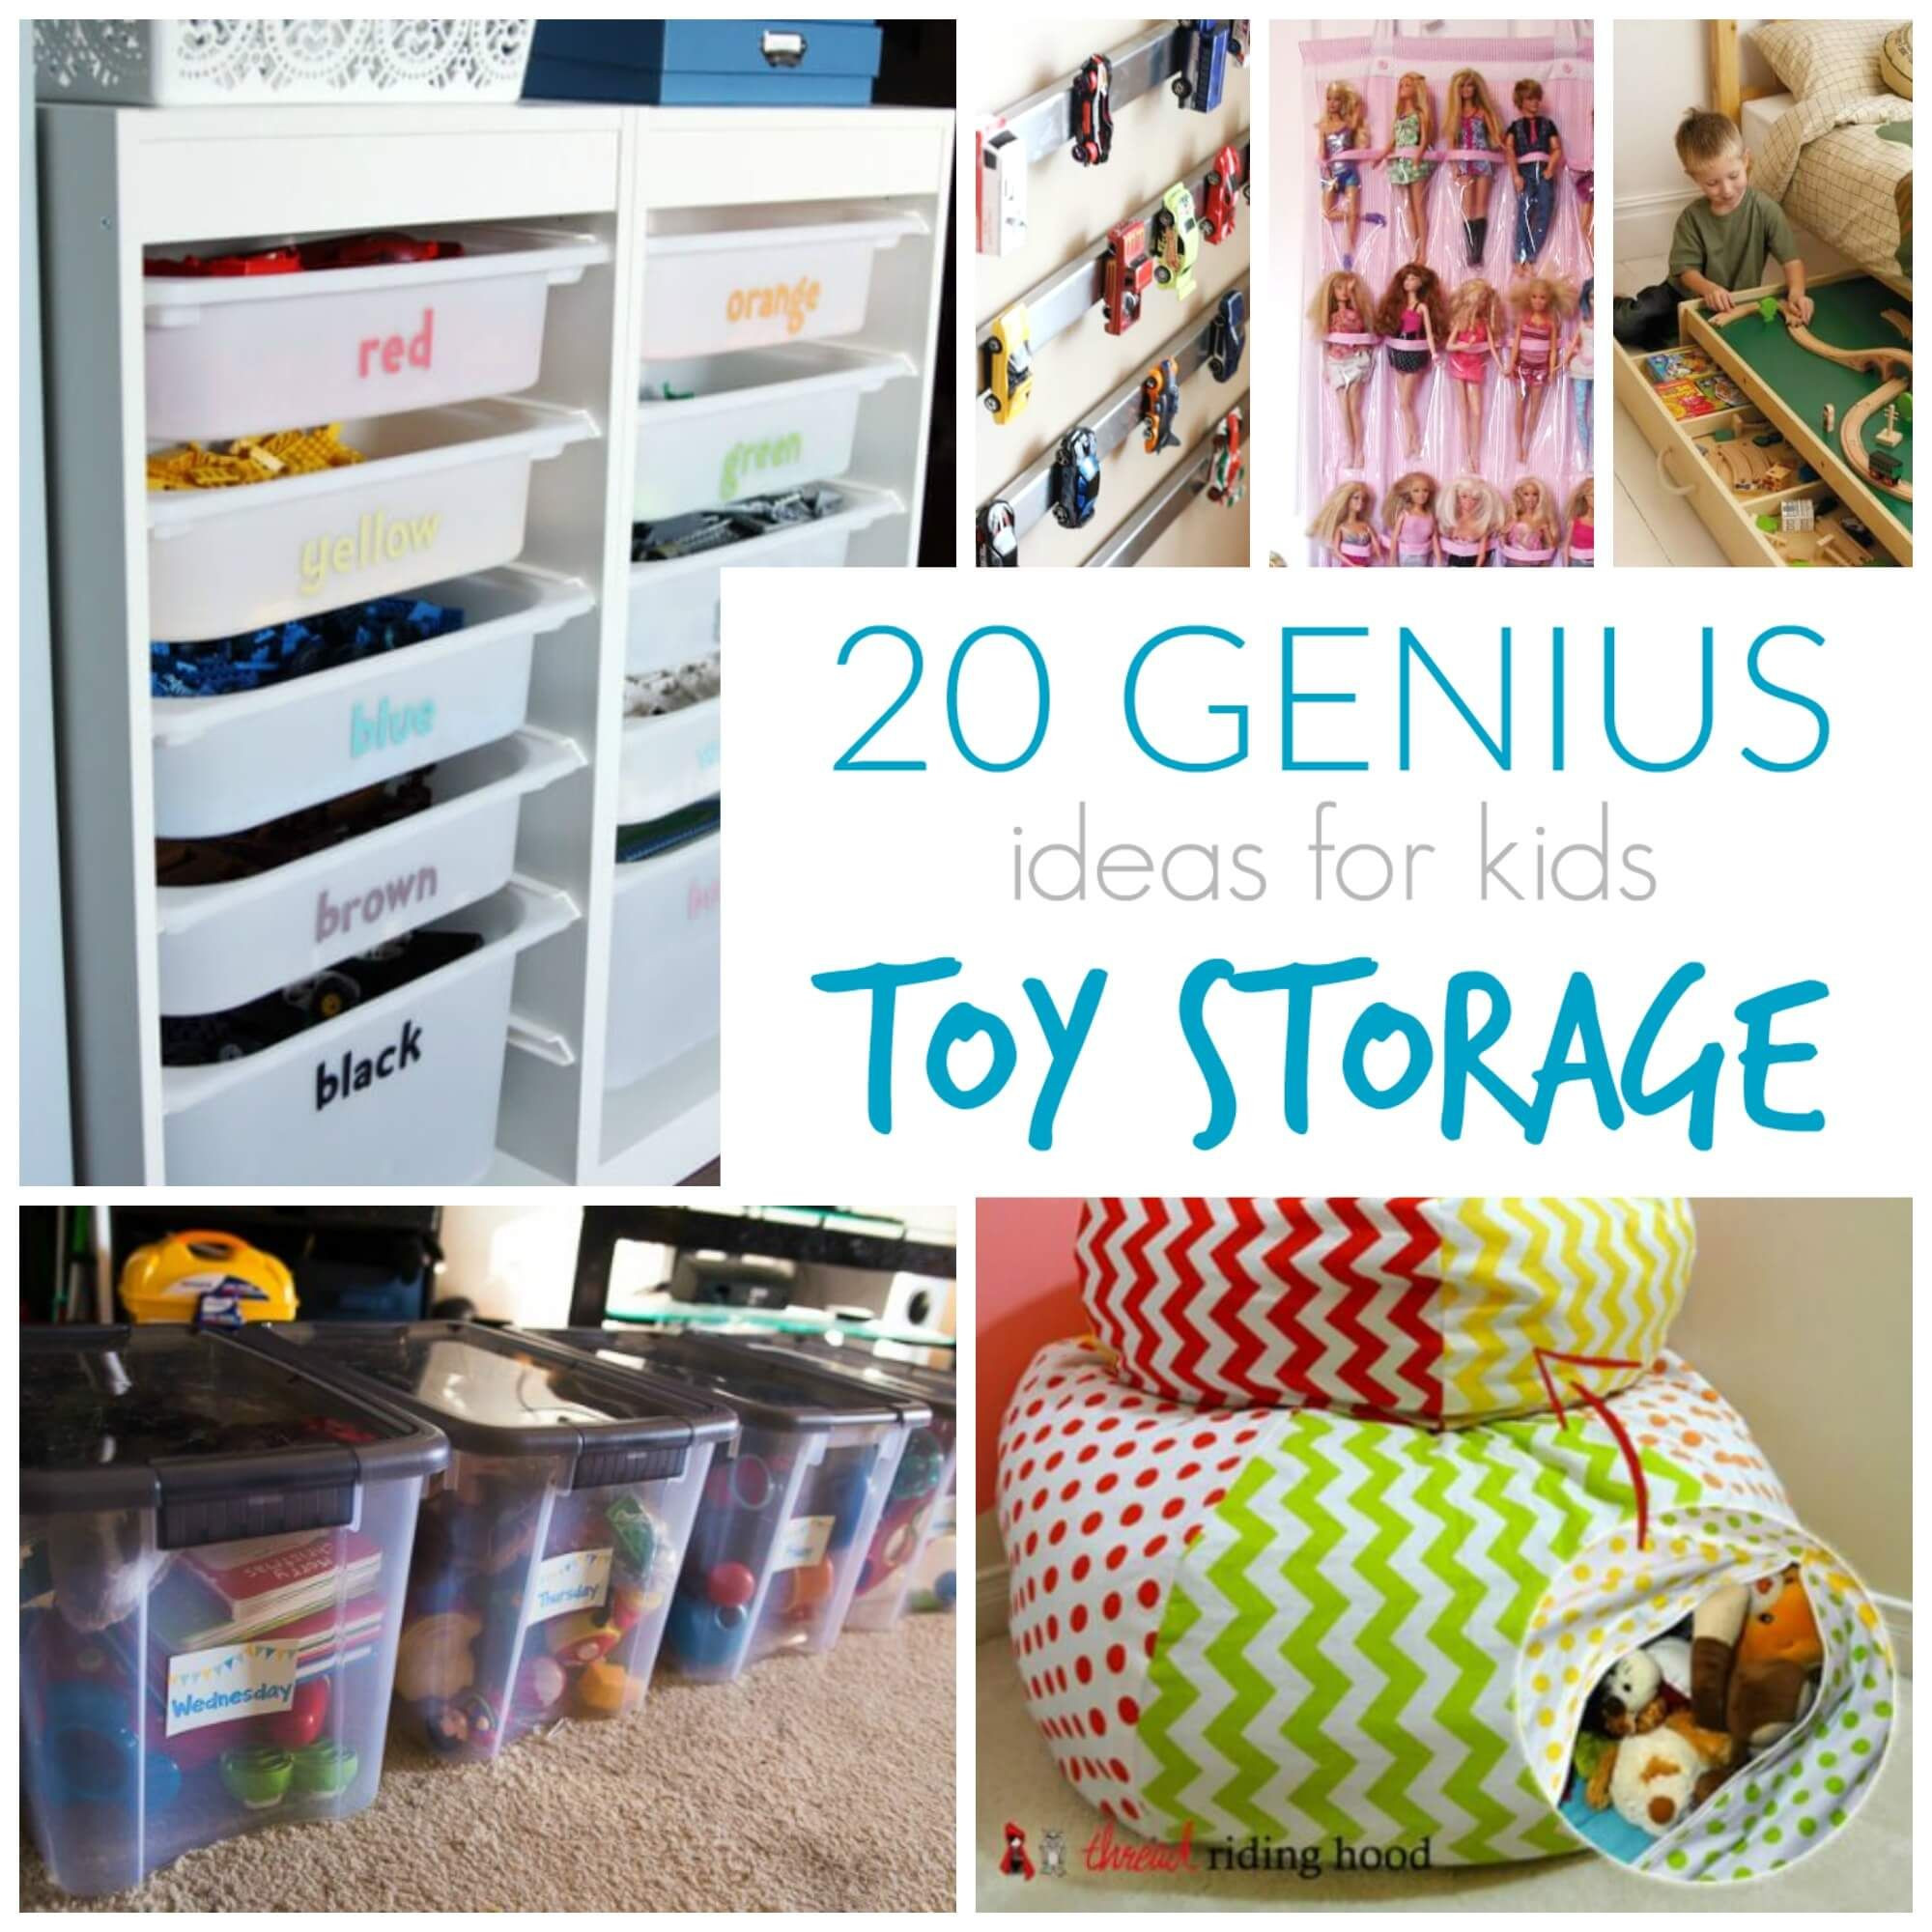 Kids Room Organizer
 7 1 Toy Storage Ideas 2019 DIY Plans In A Small Space